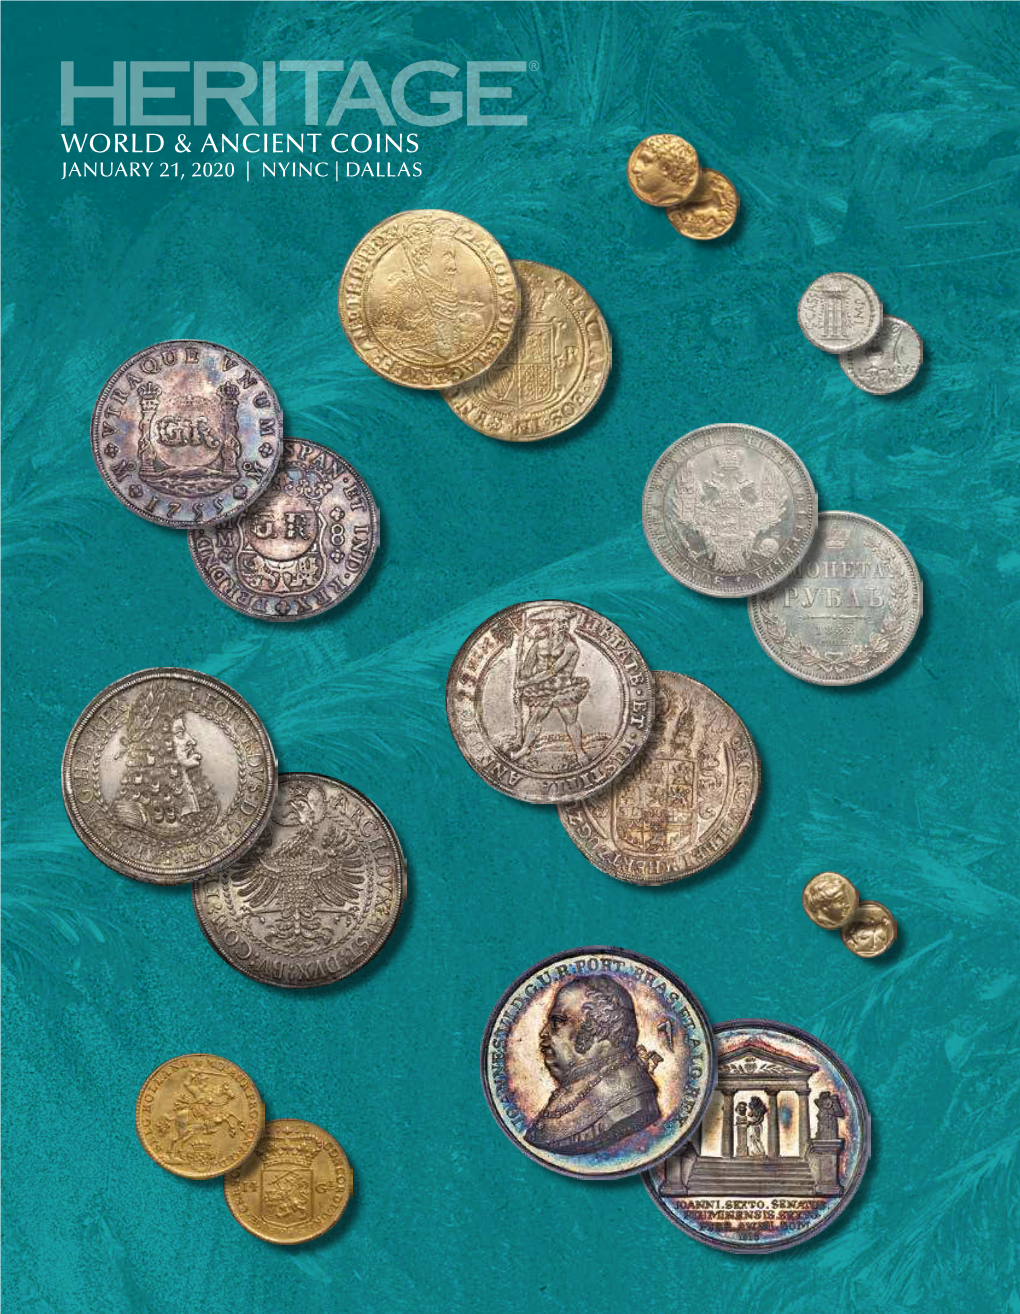 World & Ancient Coins